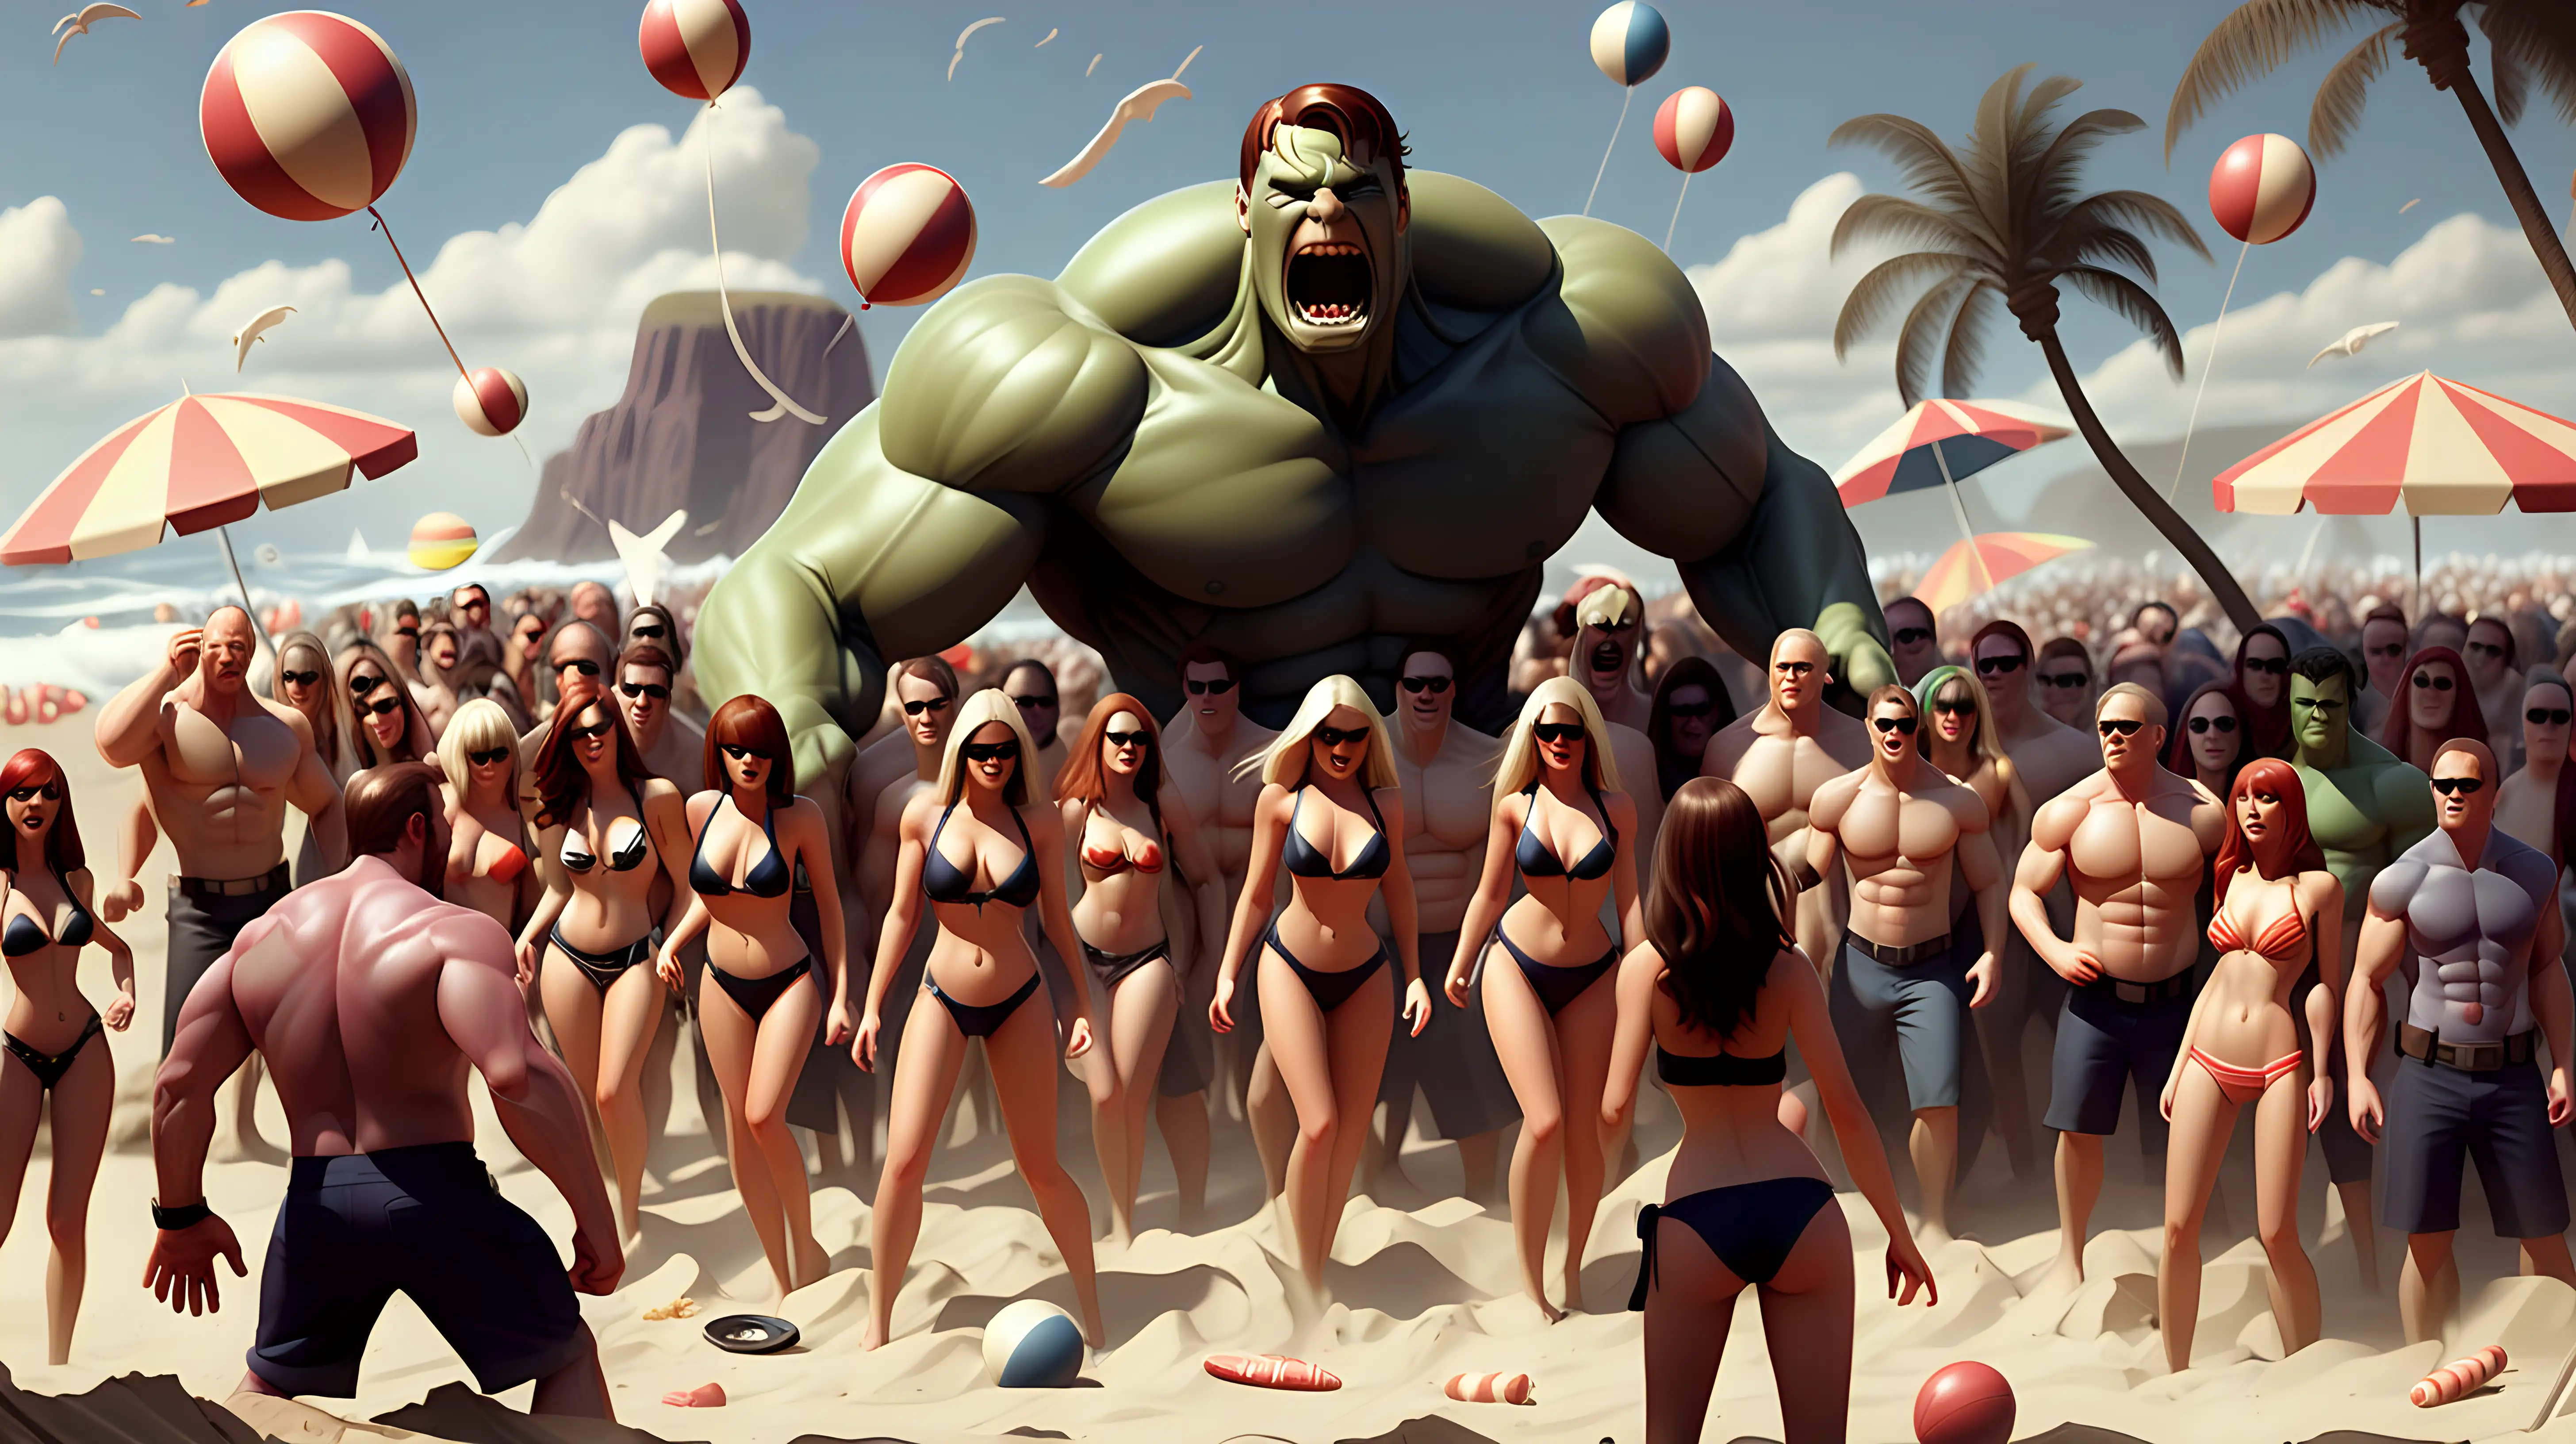 an epic beach party , i want this in landscape format 16:9 in Avenger style, zoom in on the party 